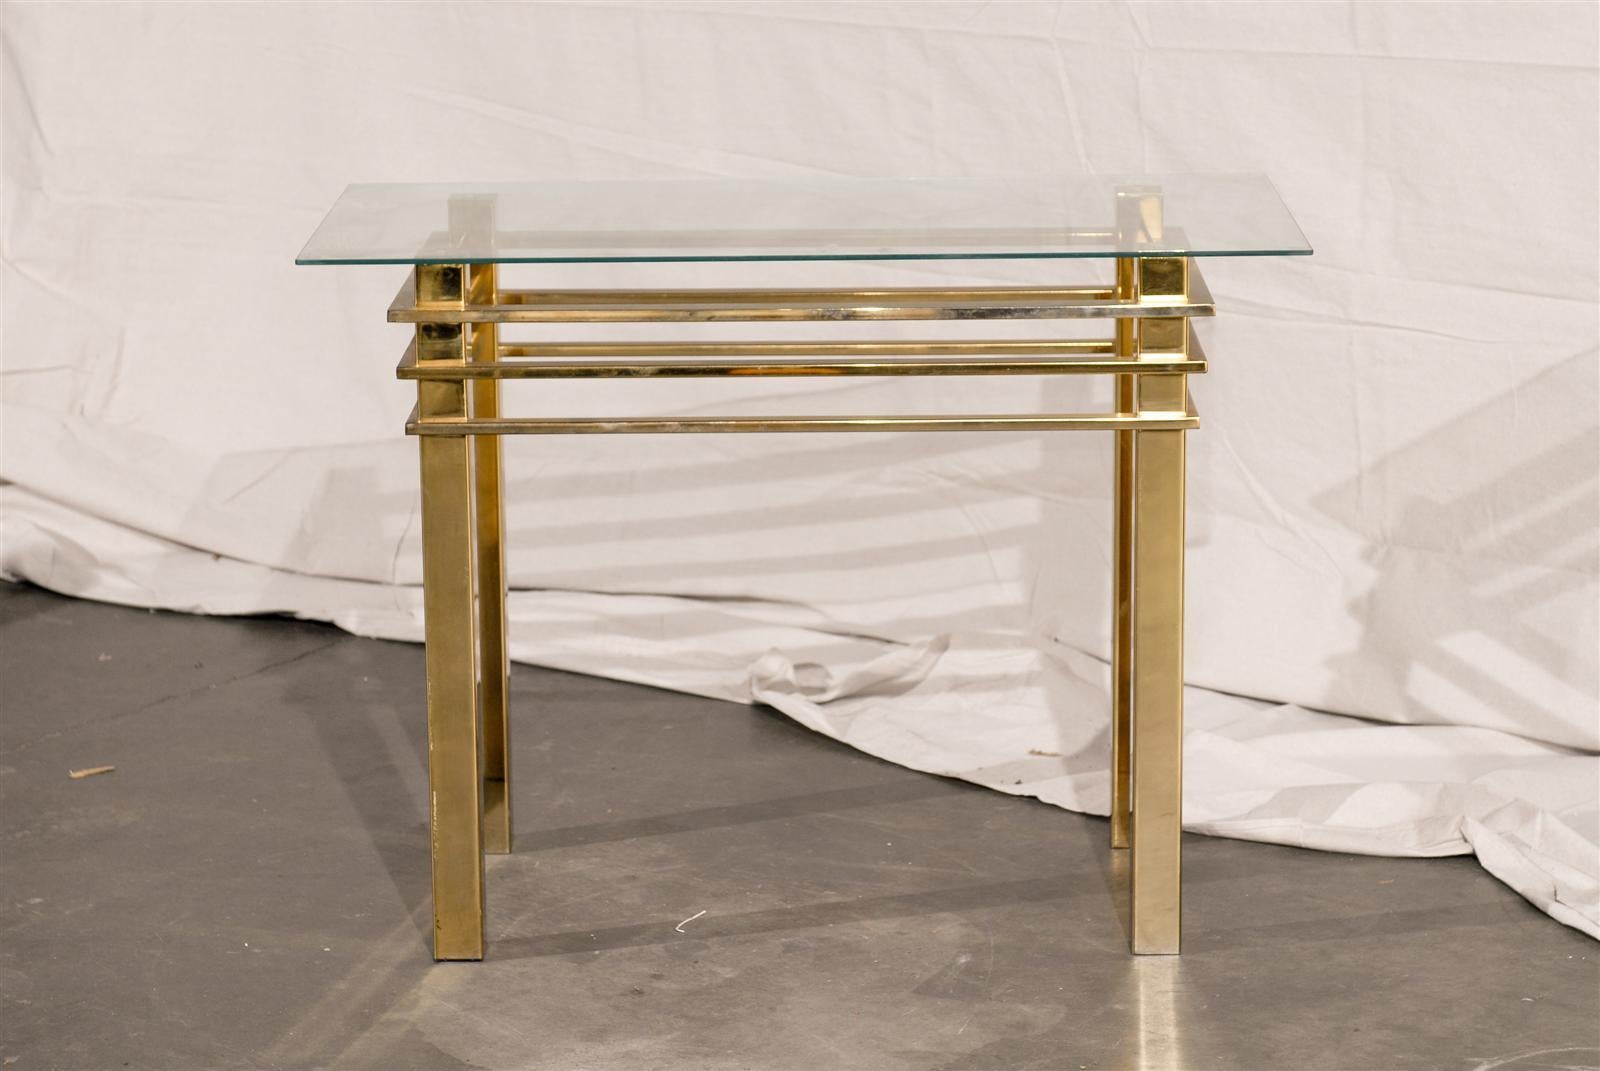 Mid-20th century brass console table with glass top.